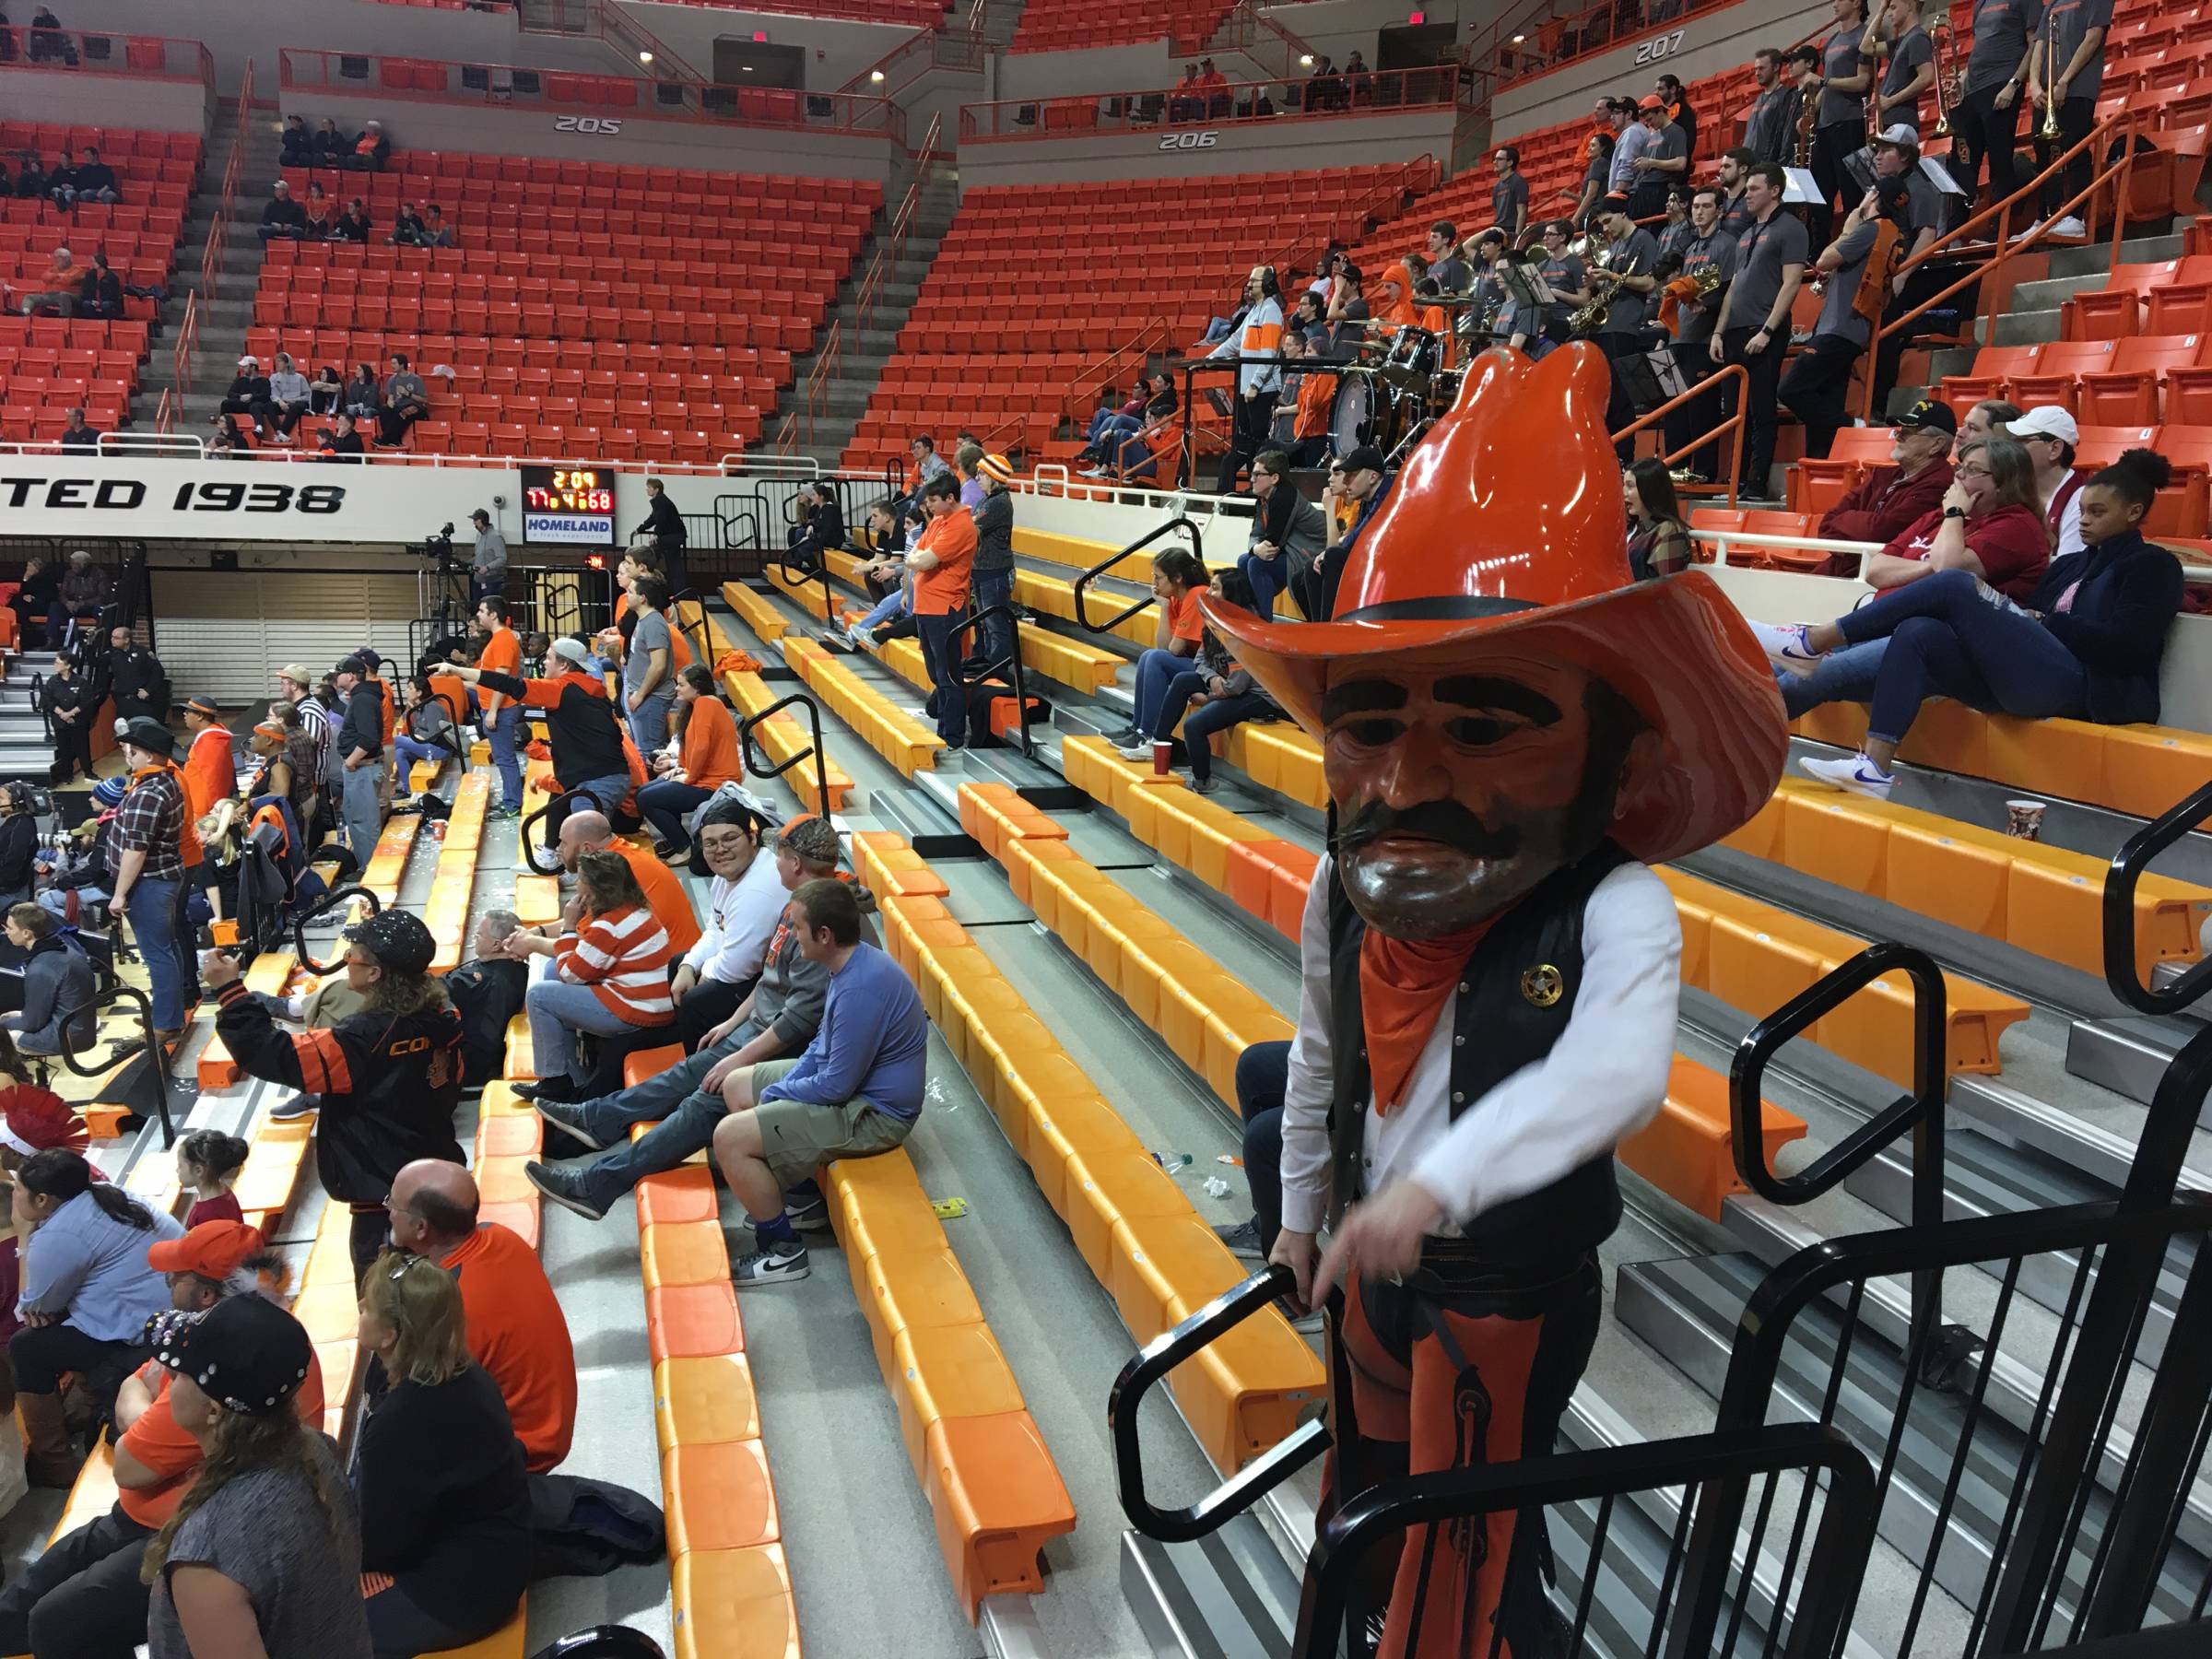 Pistol Pete at Gallagher-Iba Arena